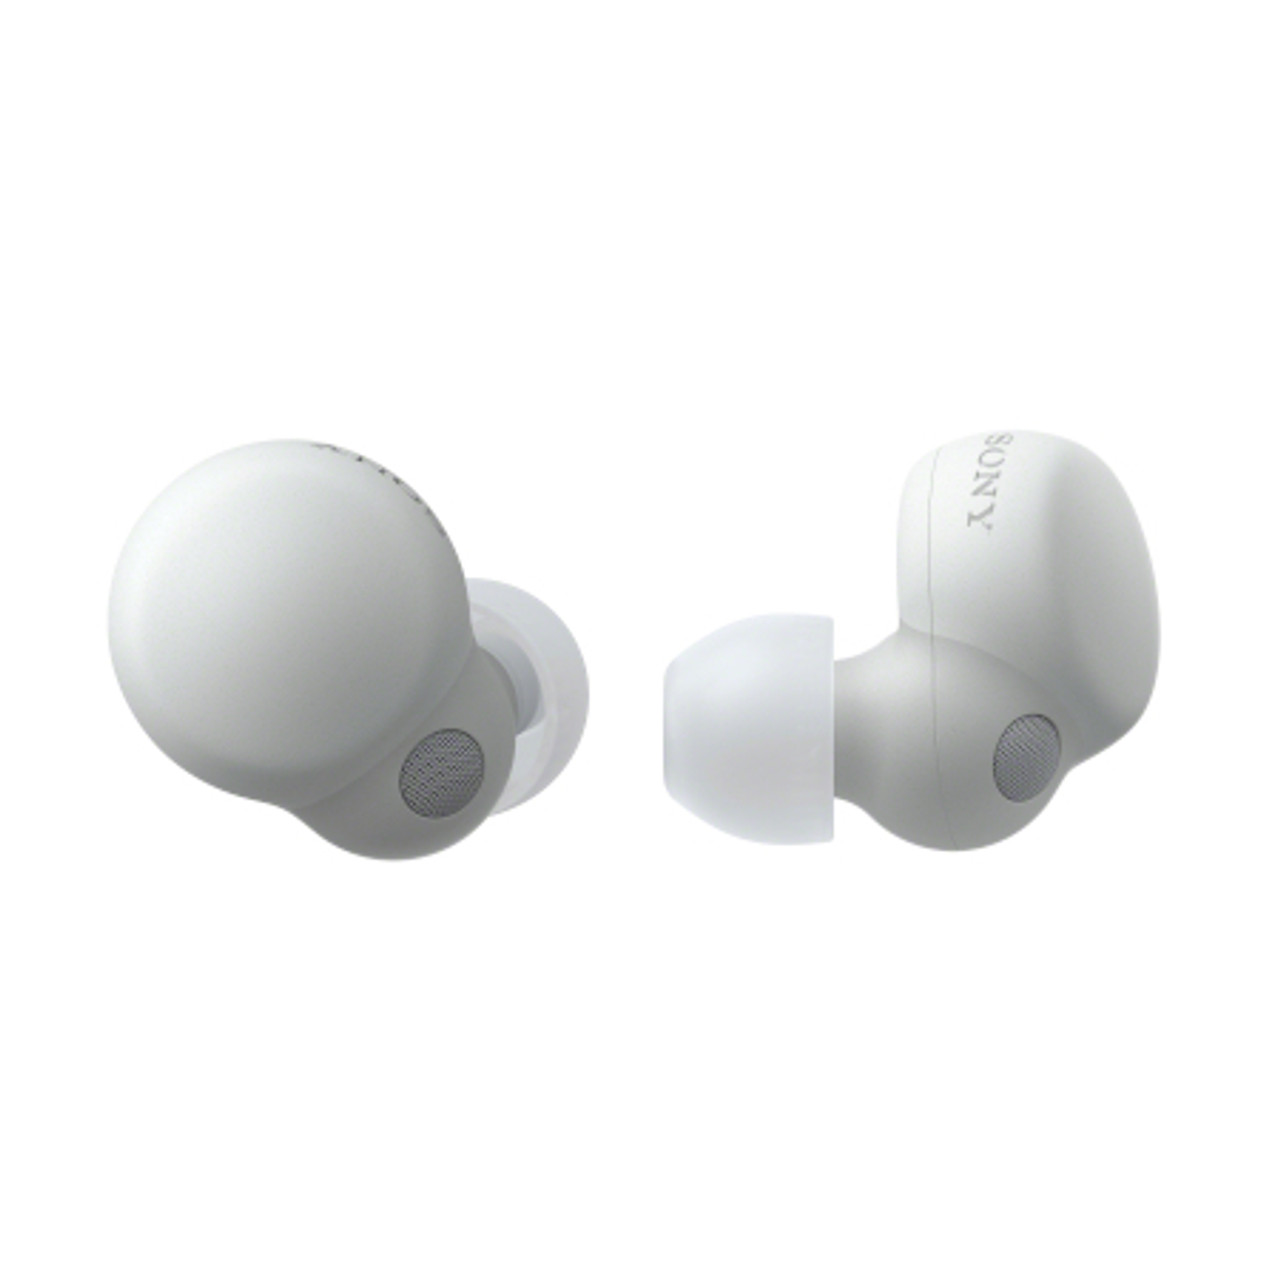 Sony True Wireless Earbuds with Charging Case, Silver, WF1000XM4/S 